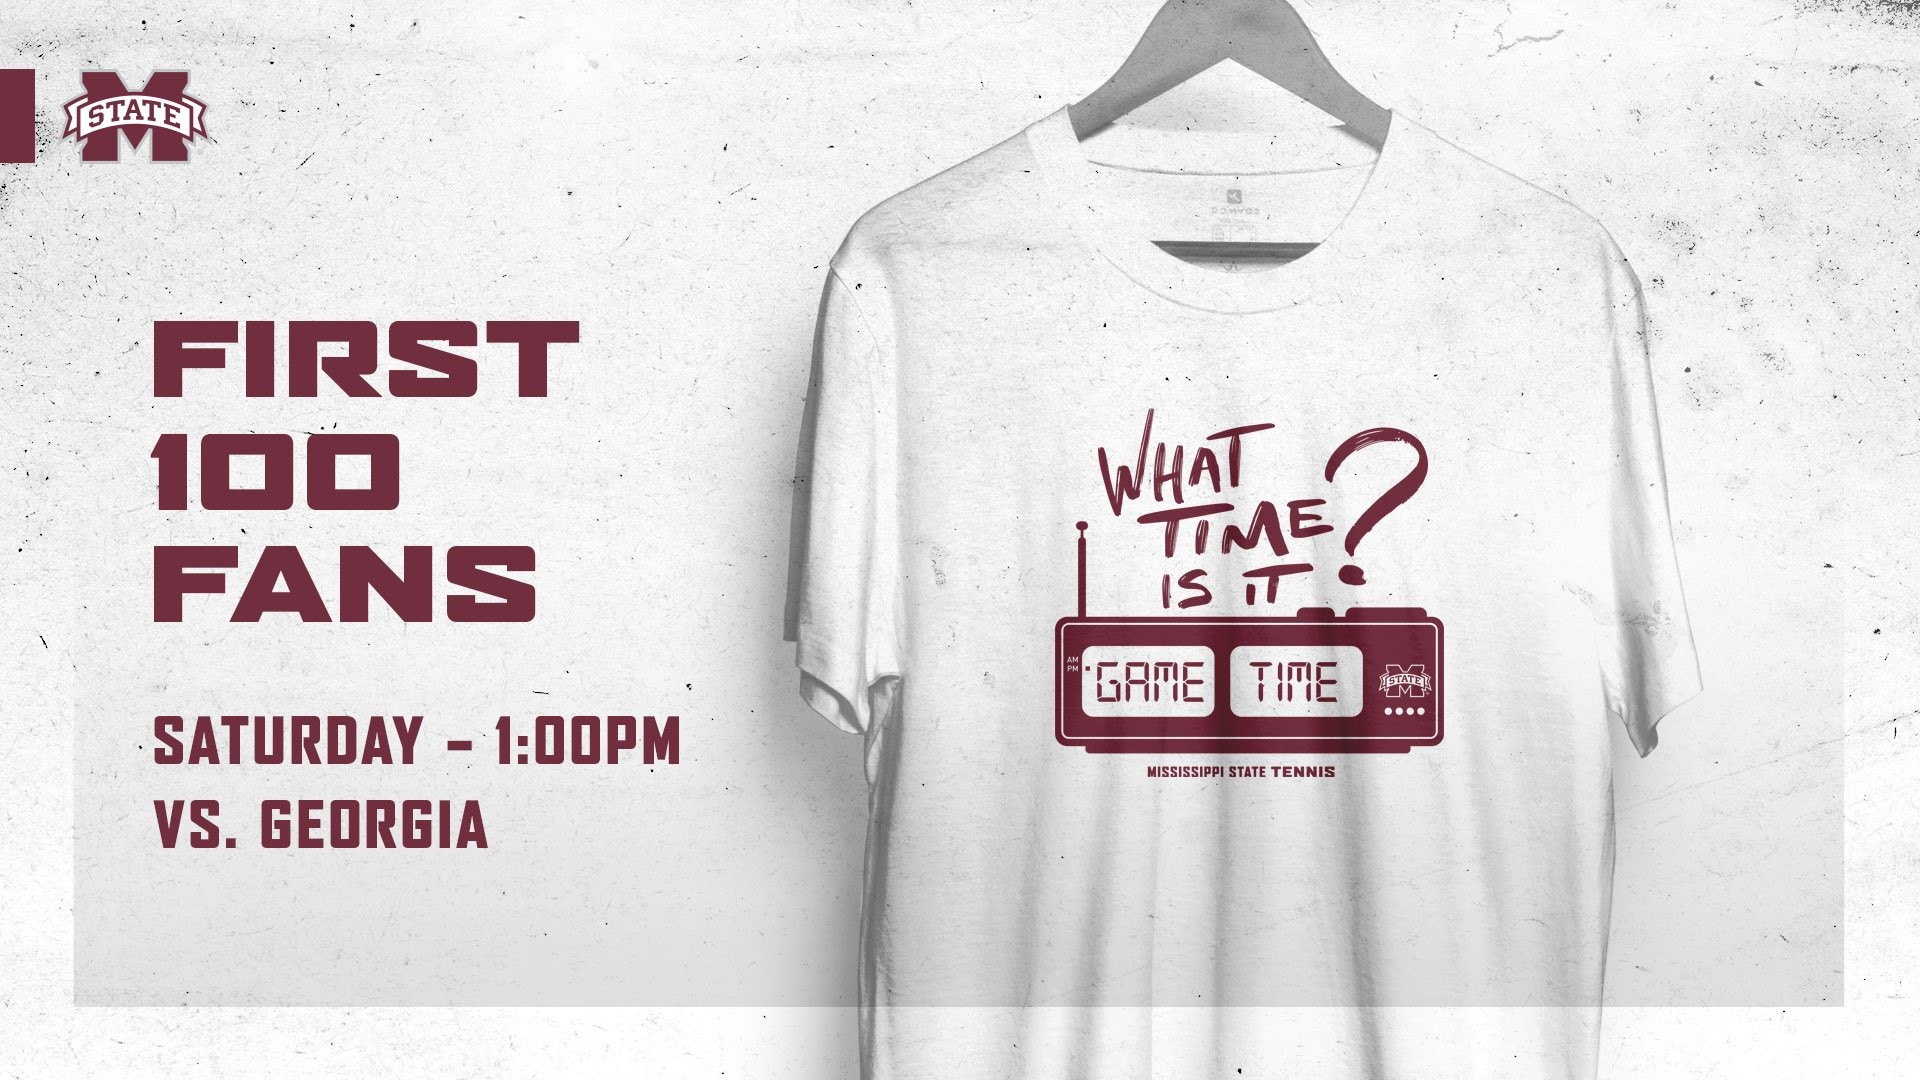 Promotional graphic for T-shirt giveaway at MSU men's tennis match